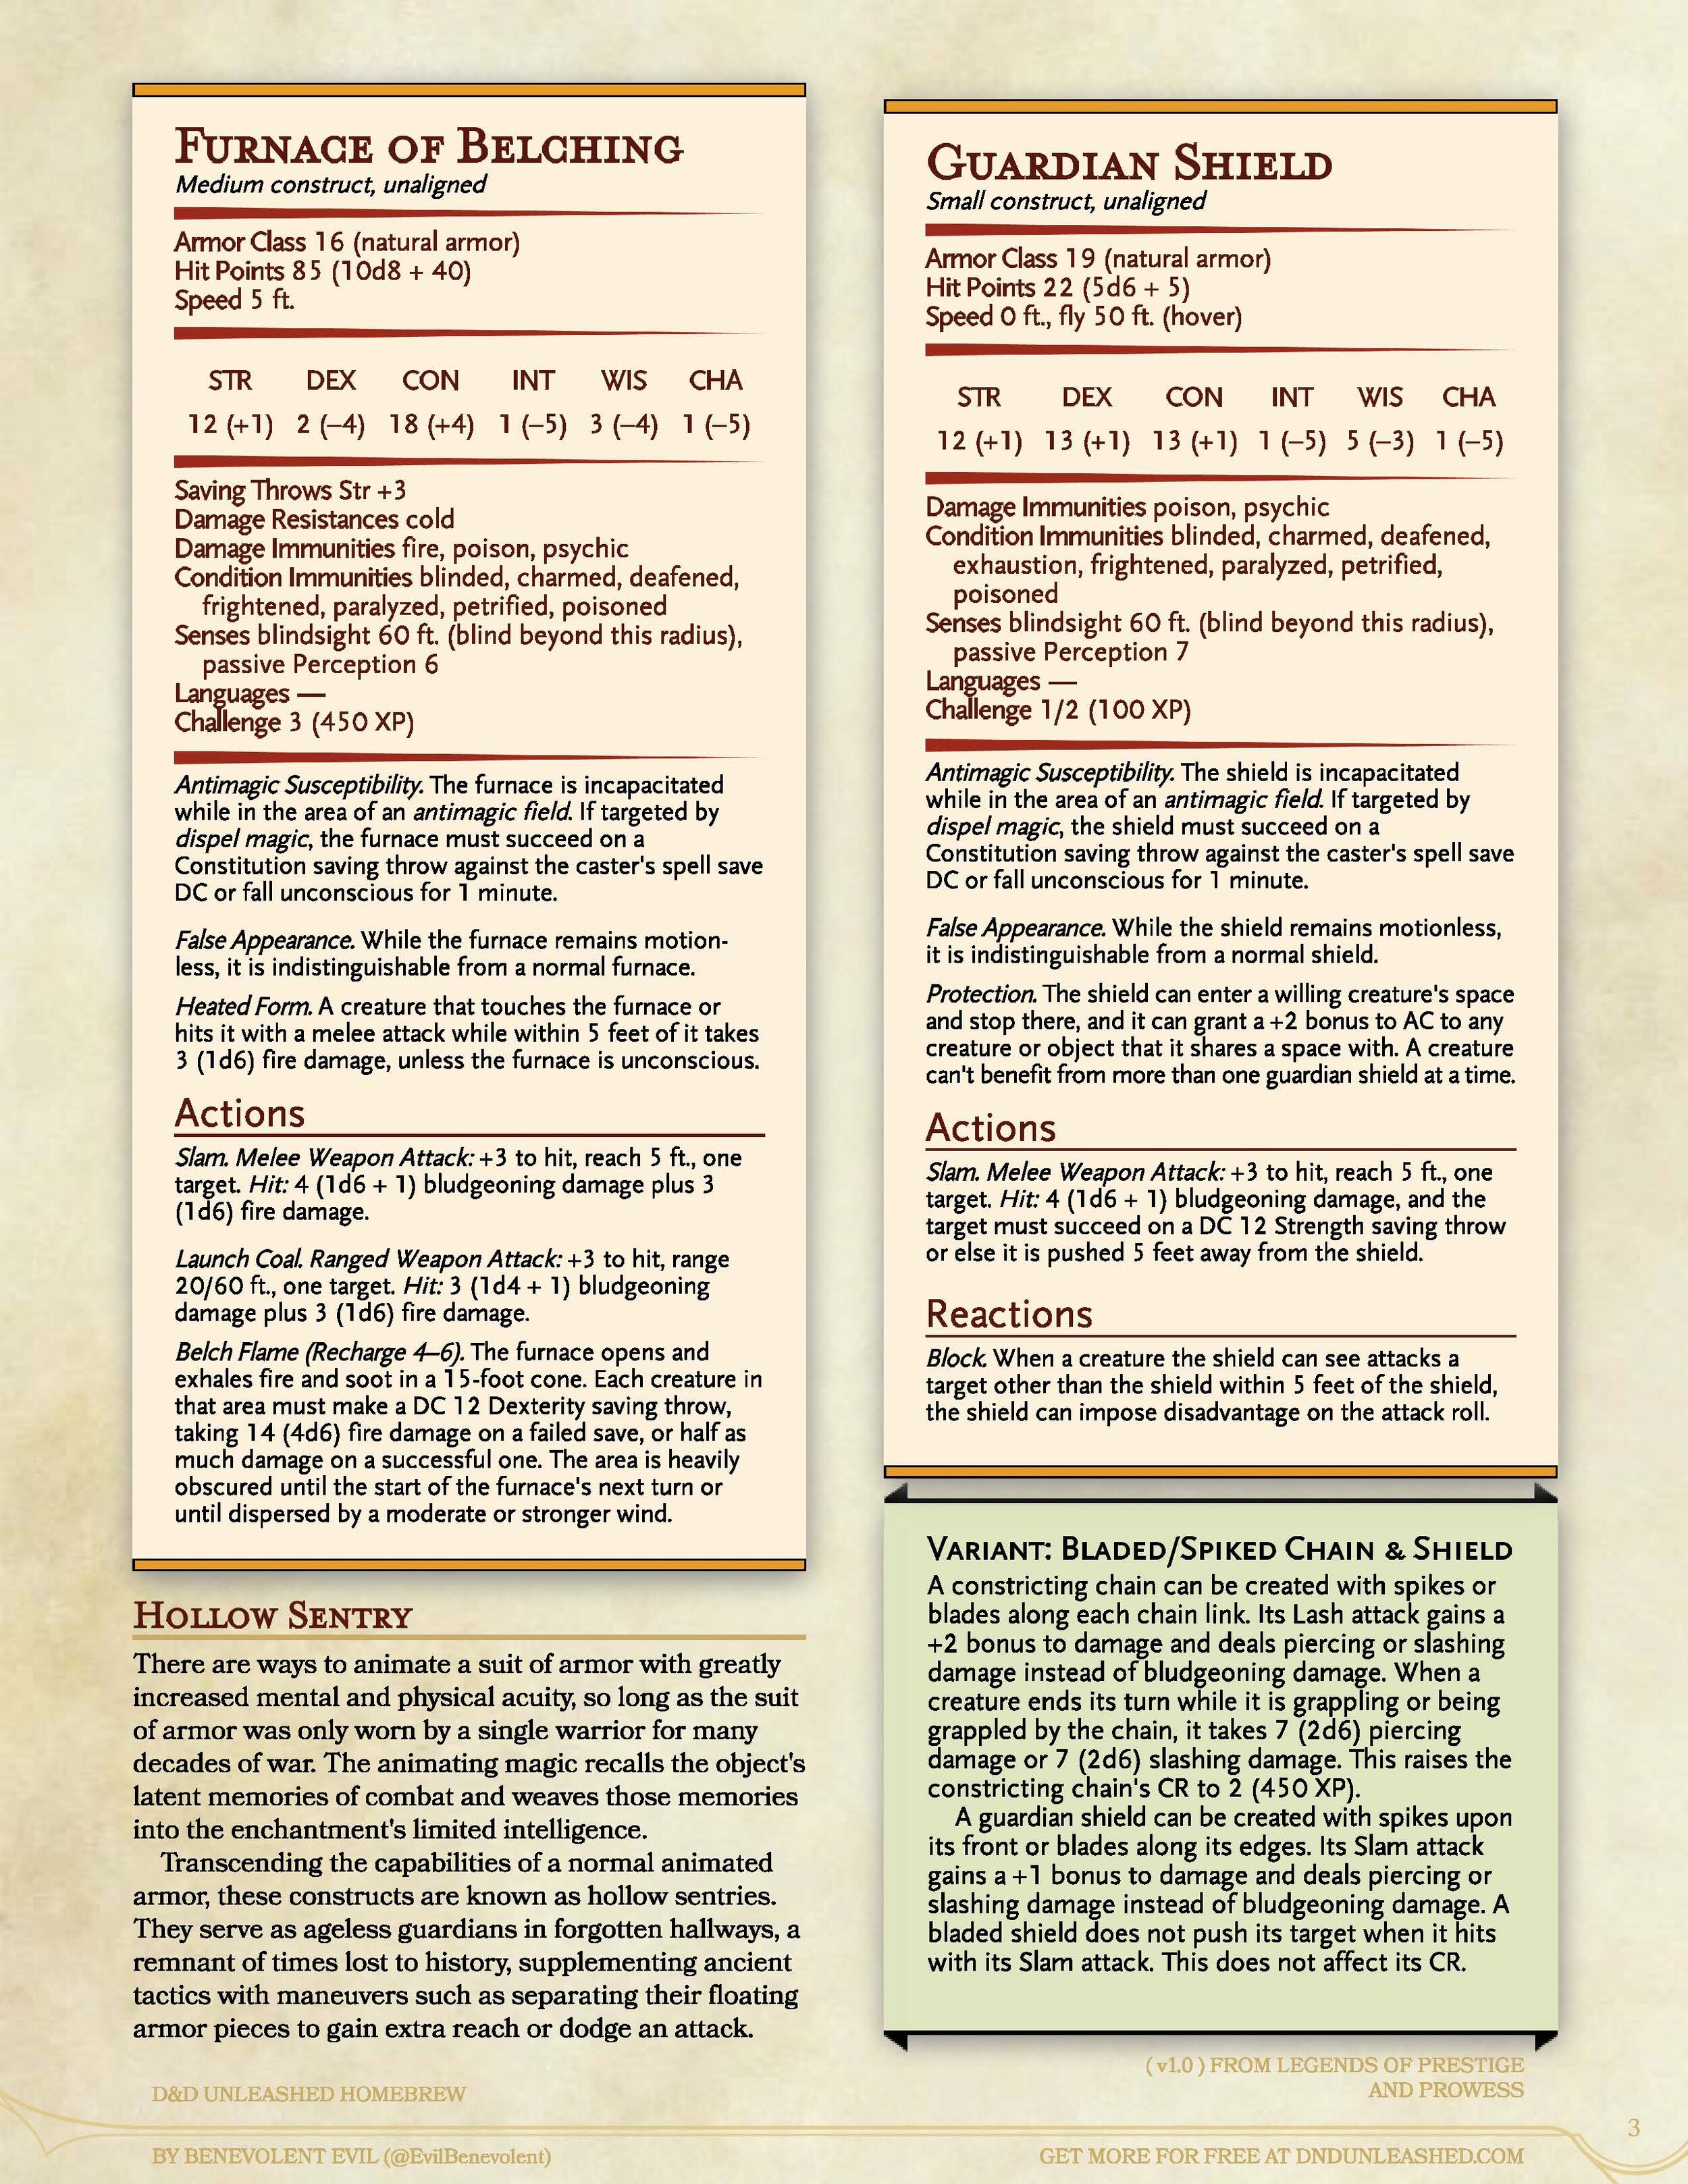 D&D Unleashed - New Animated Objects (1p0)_Page_3.jpg